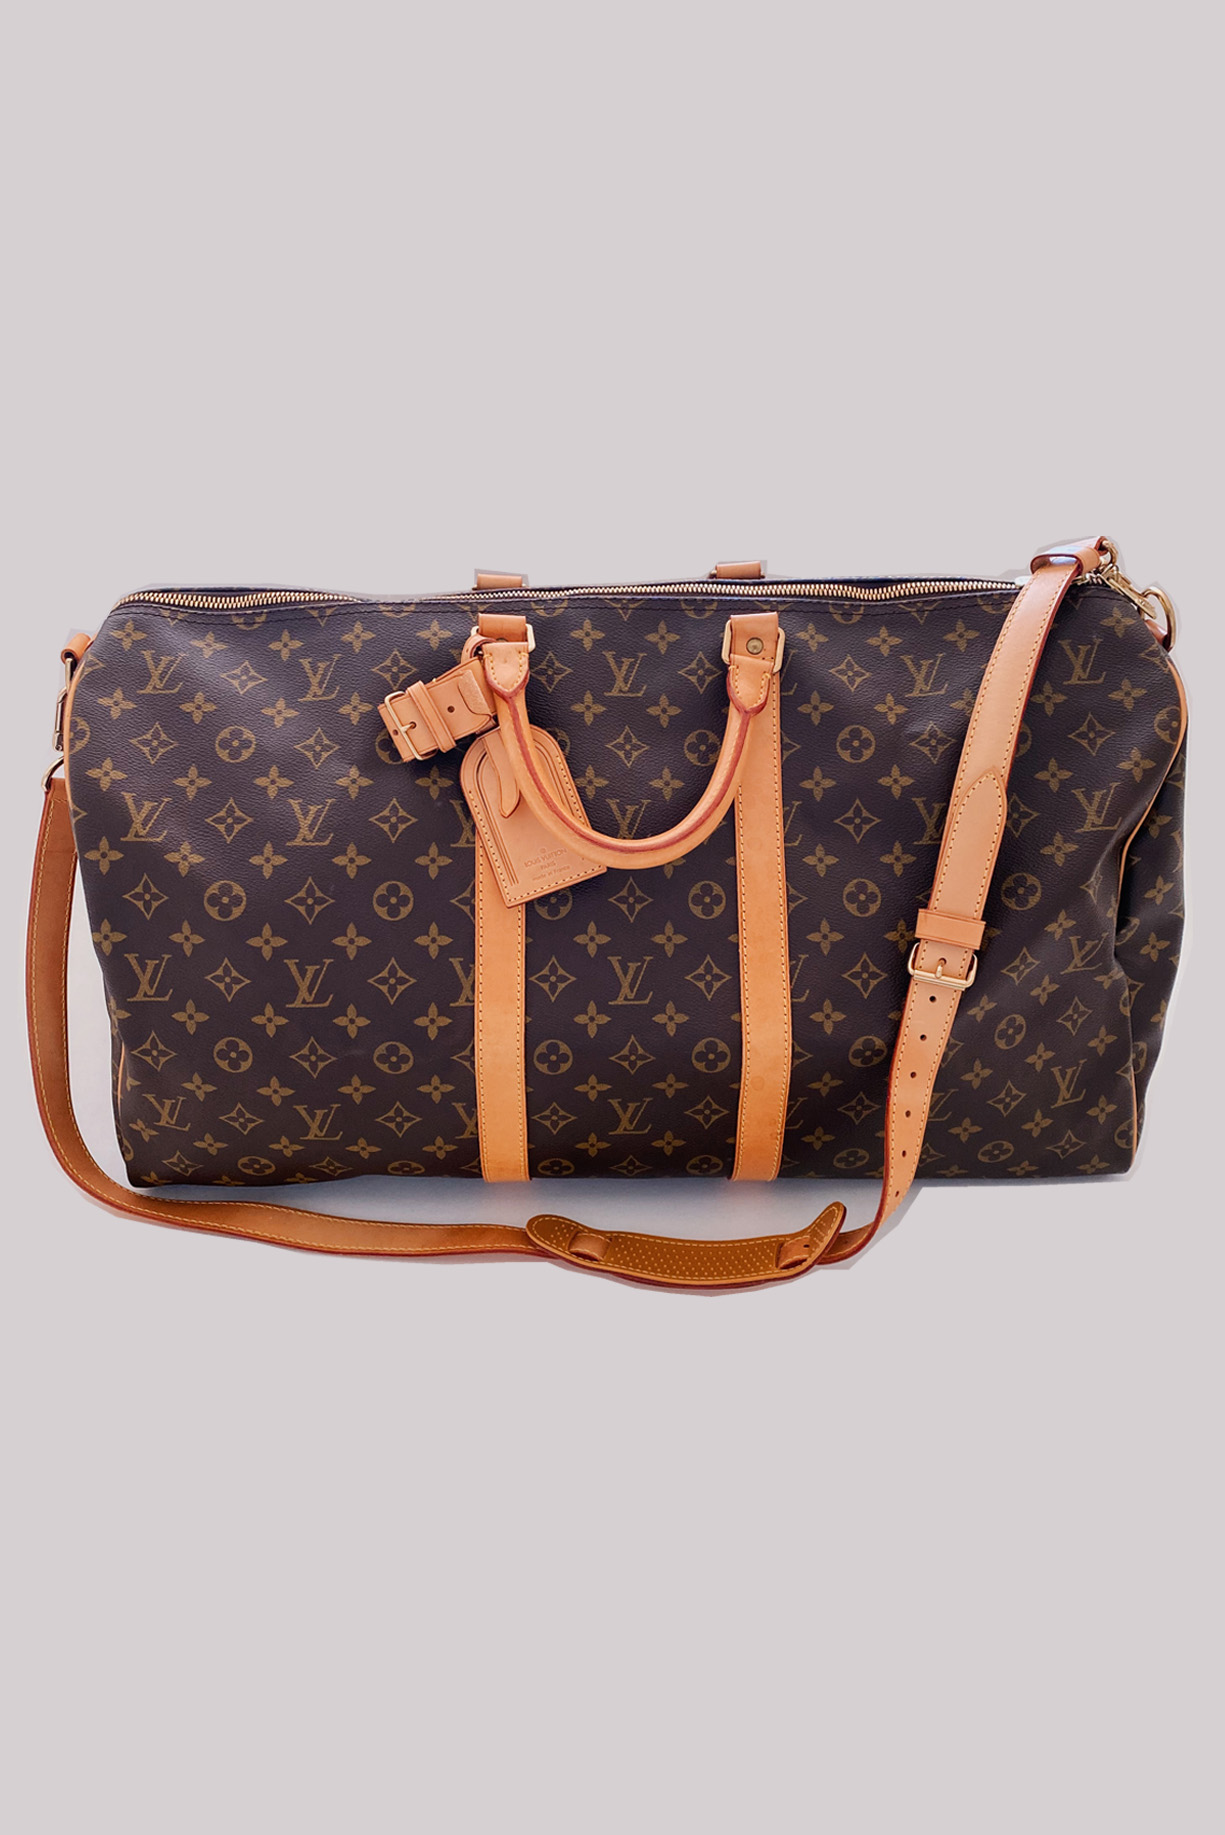 Louis Vuitton Keepall 55 - 53 For Sale on 1stDibs